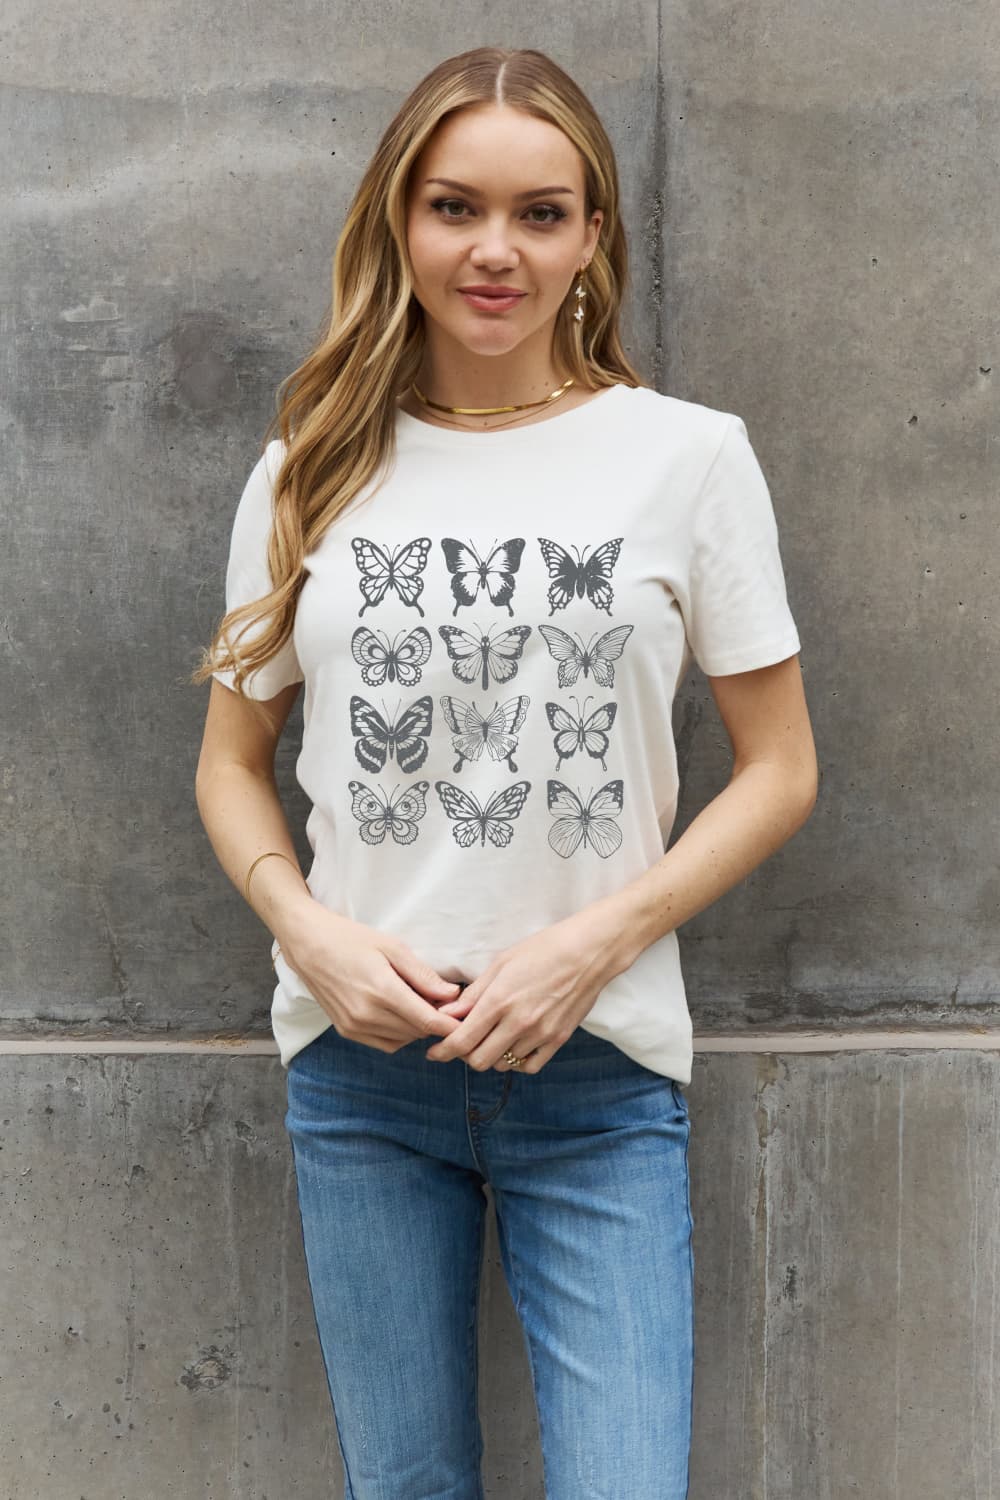 Dim Gray Simply Love Butterfly Graphic Cotton T-Shirt